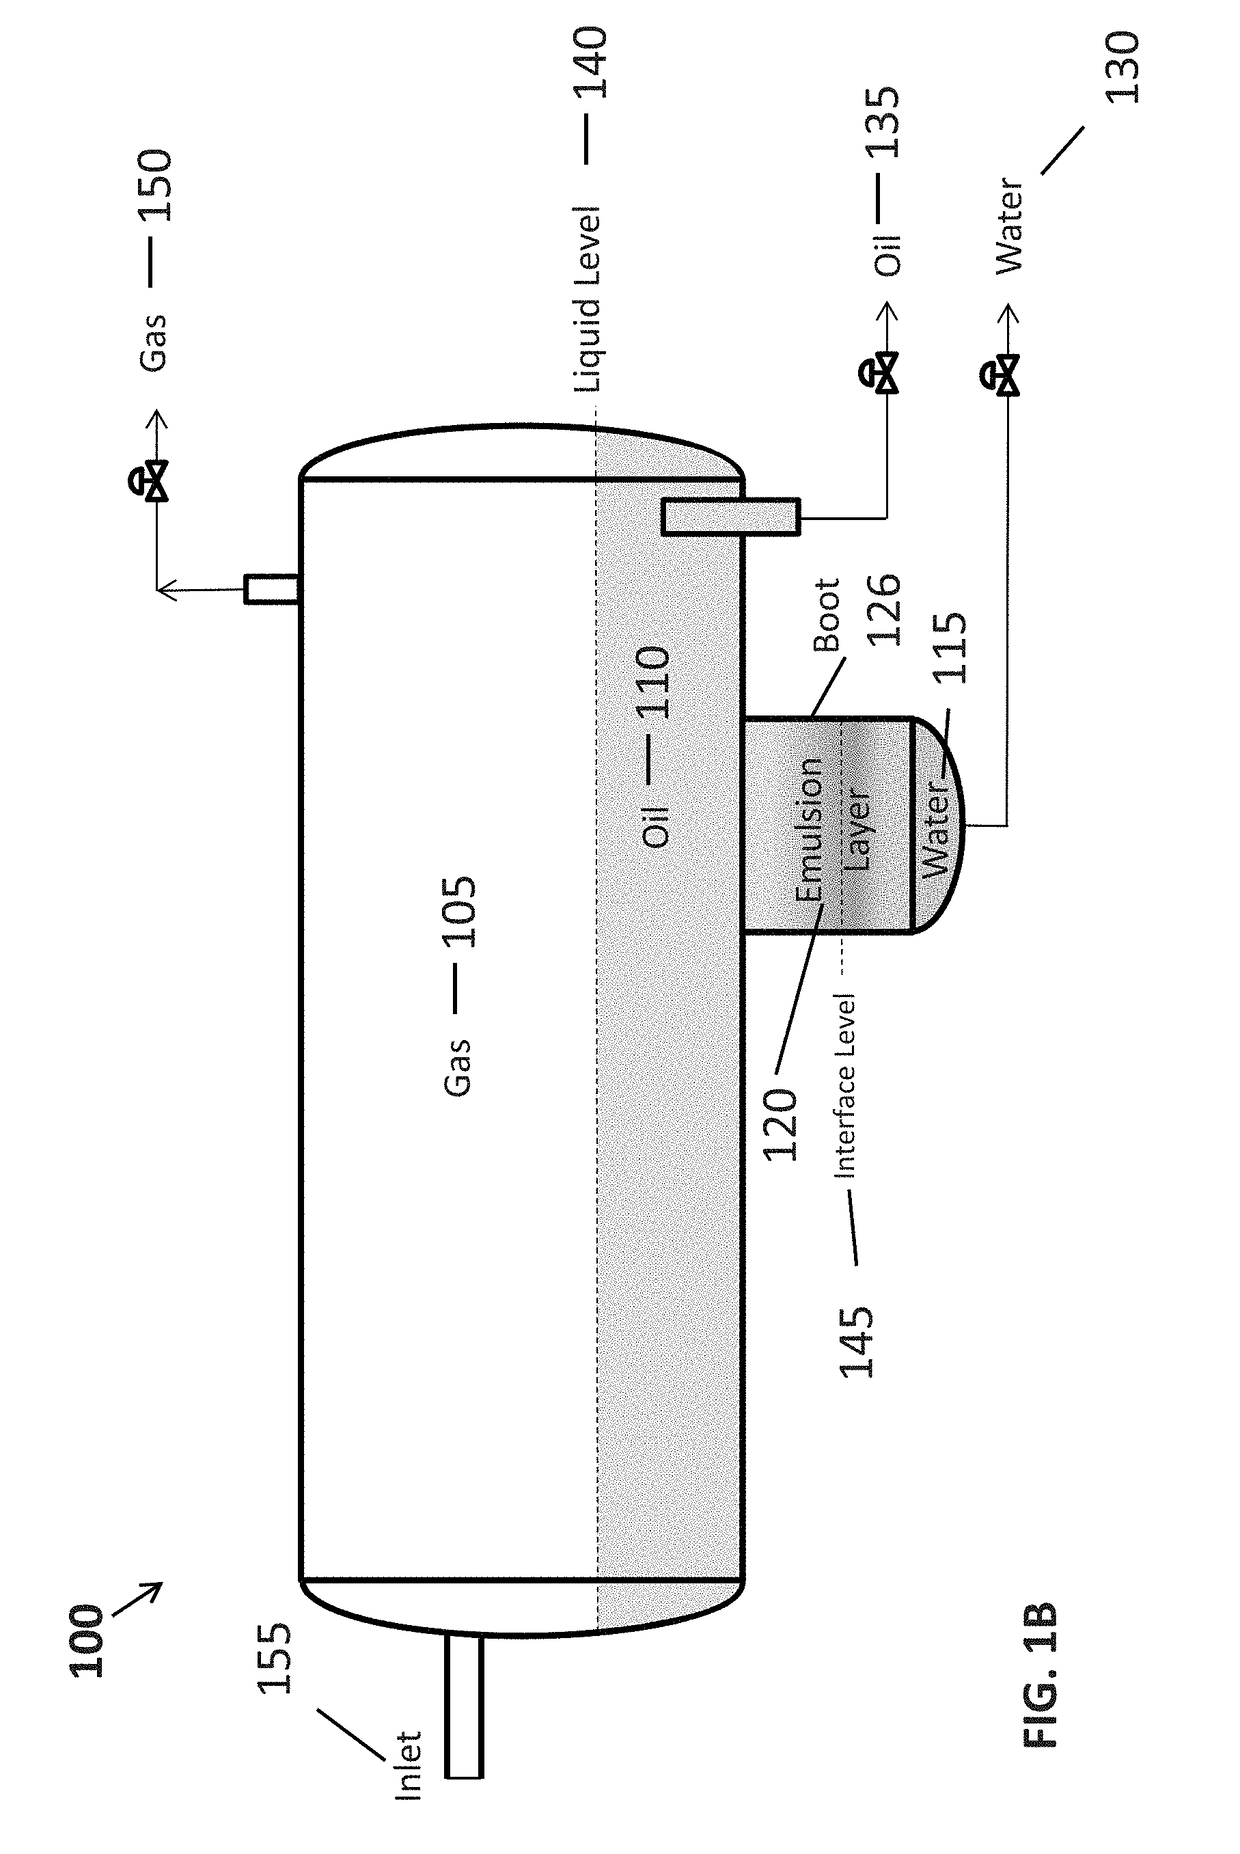 Processes for analysis and optimization of multiphase separators, particular in regards to simulated gravity separation of immiscible liquid dispersions